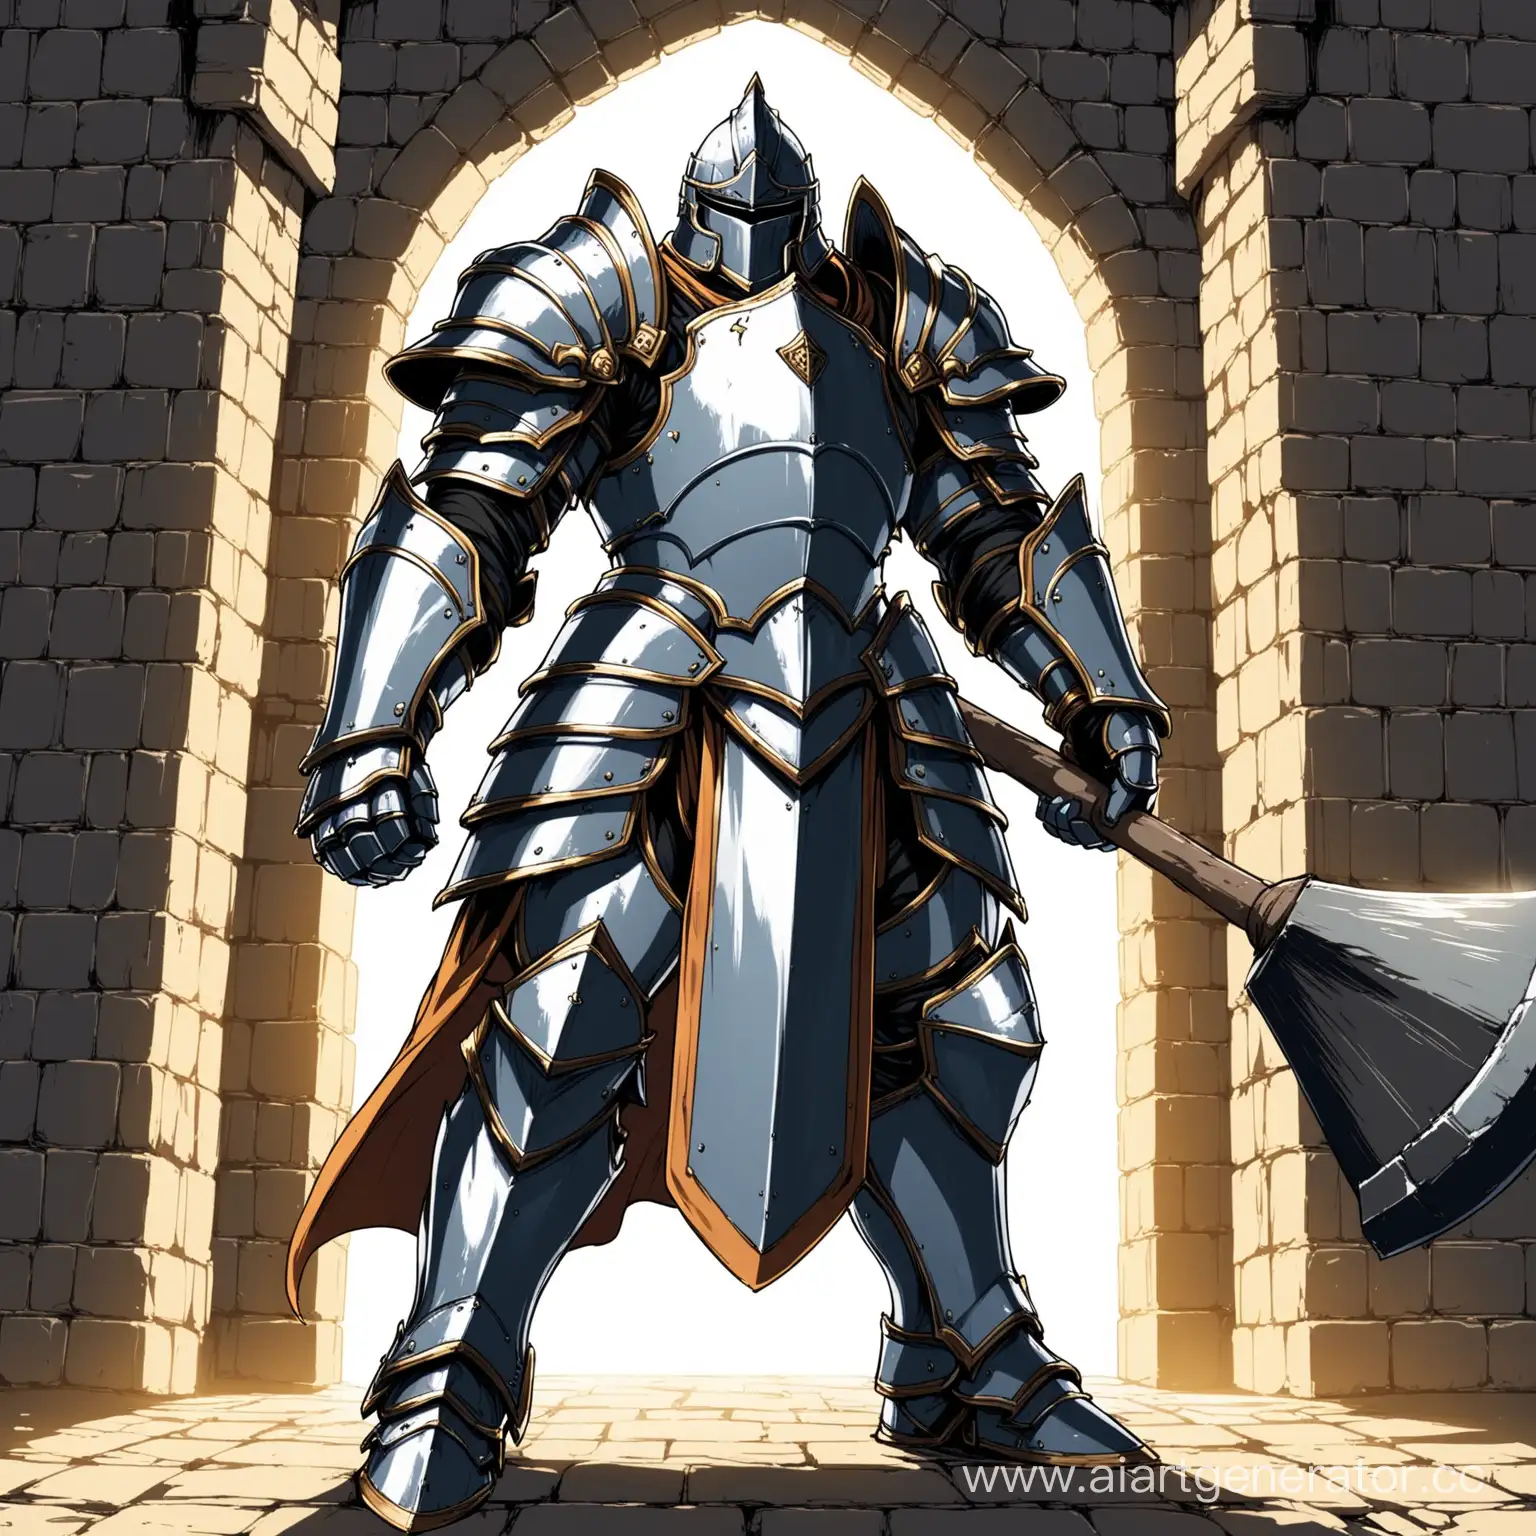 Mighty-Anime-Paladin-Guarding-Fortress-with-Hammer